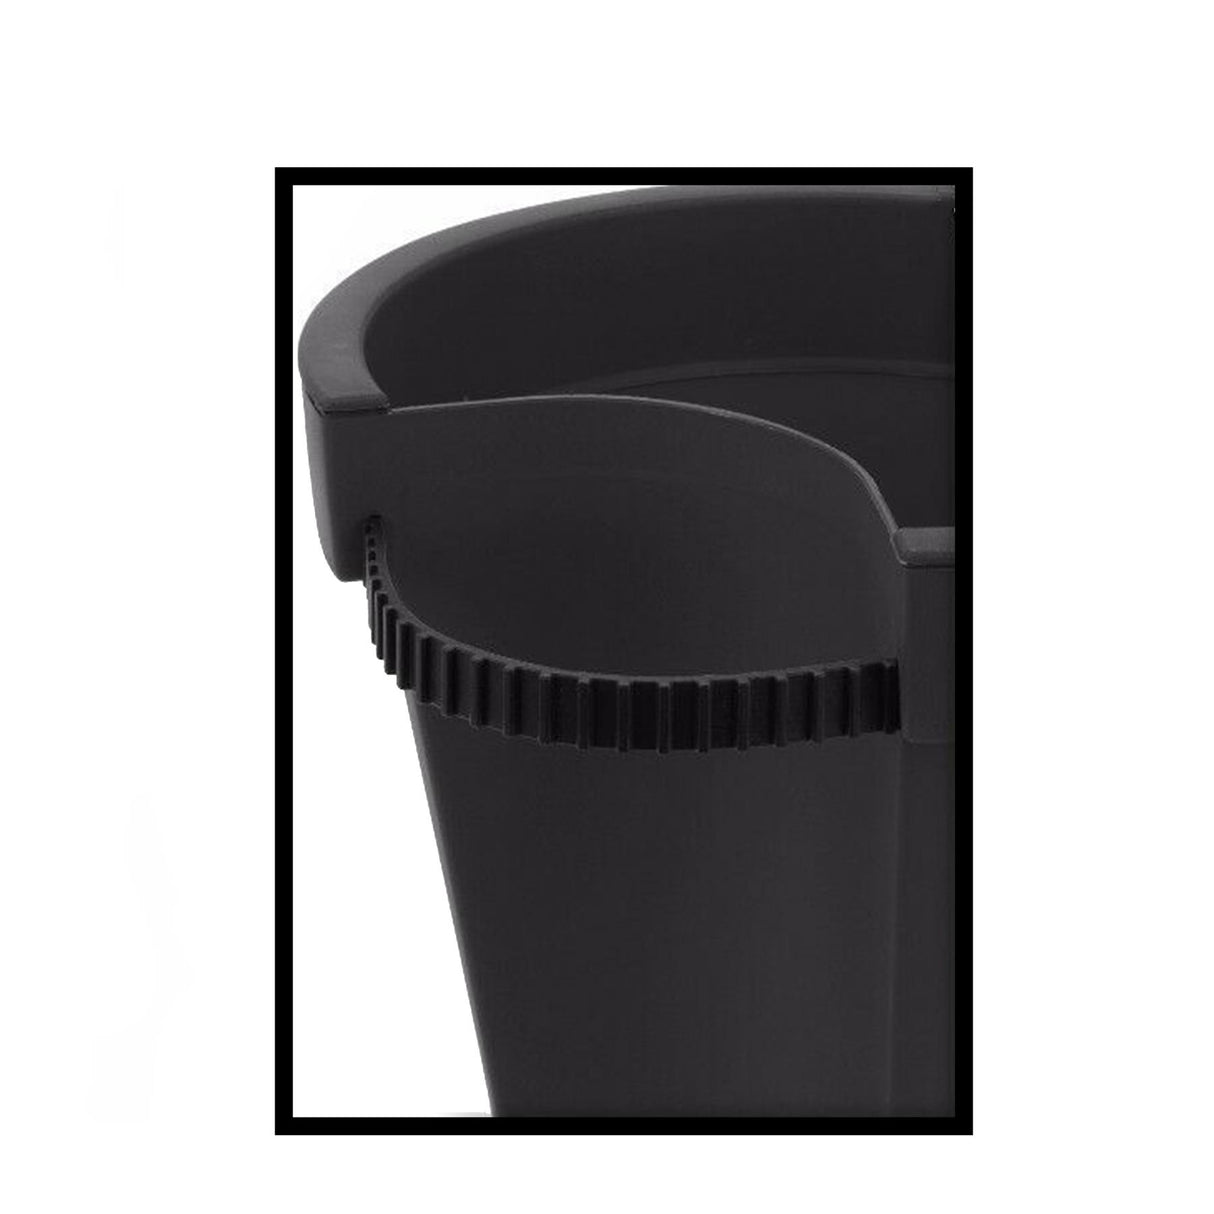 Black Drainpipe Planter by GEEZY - UKBuyZone